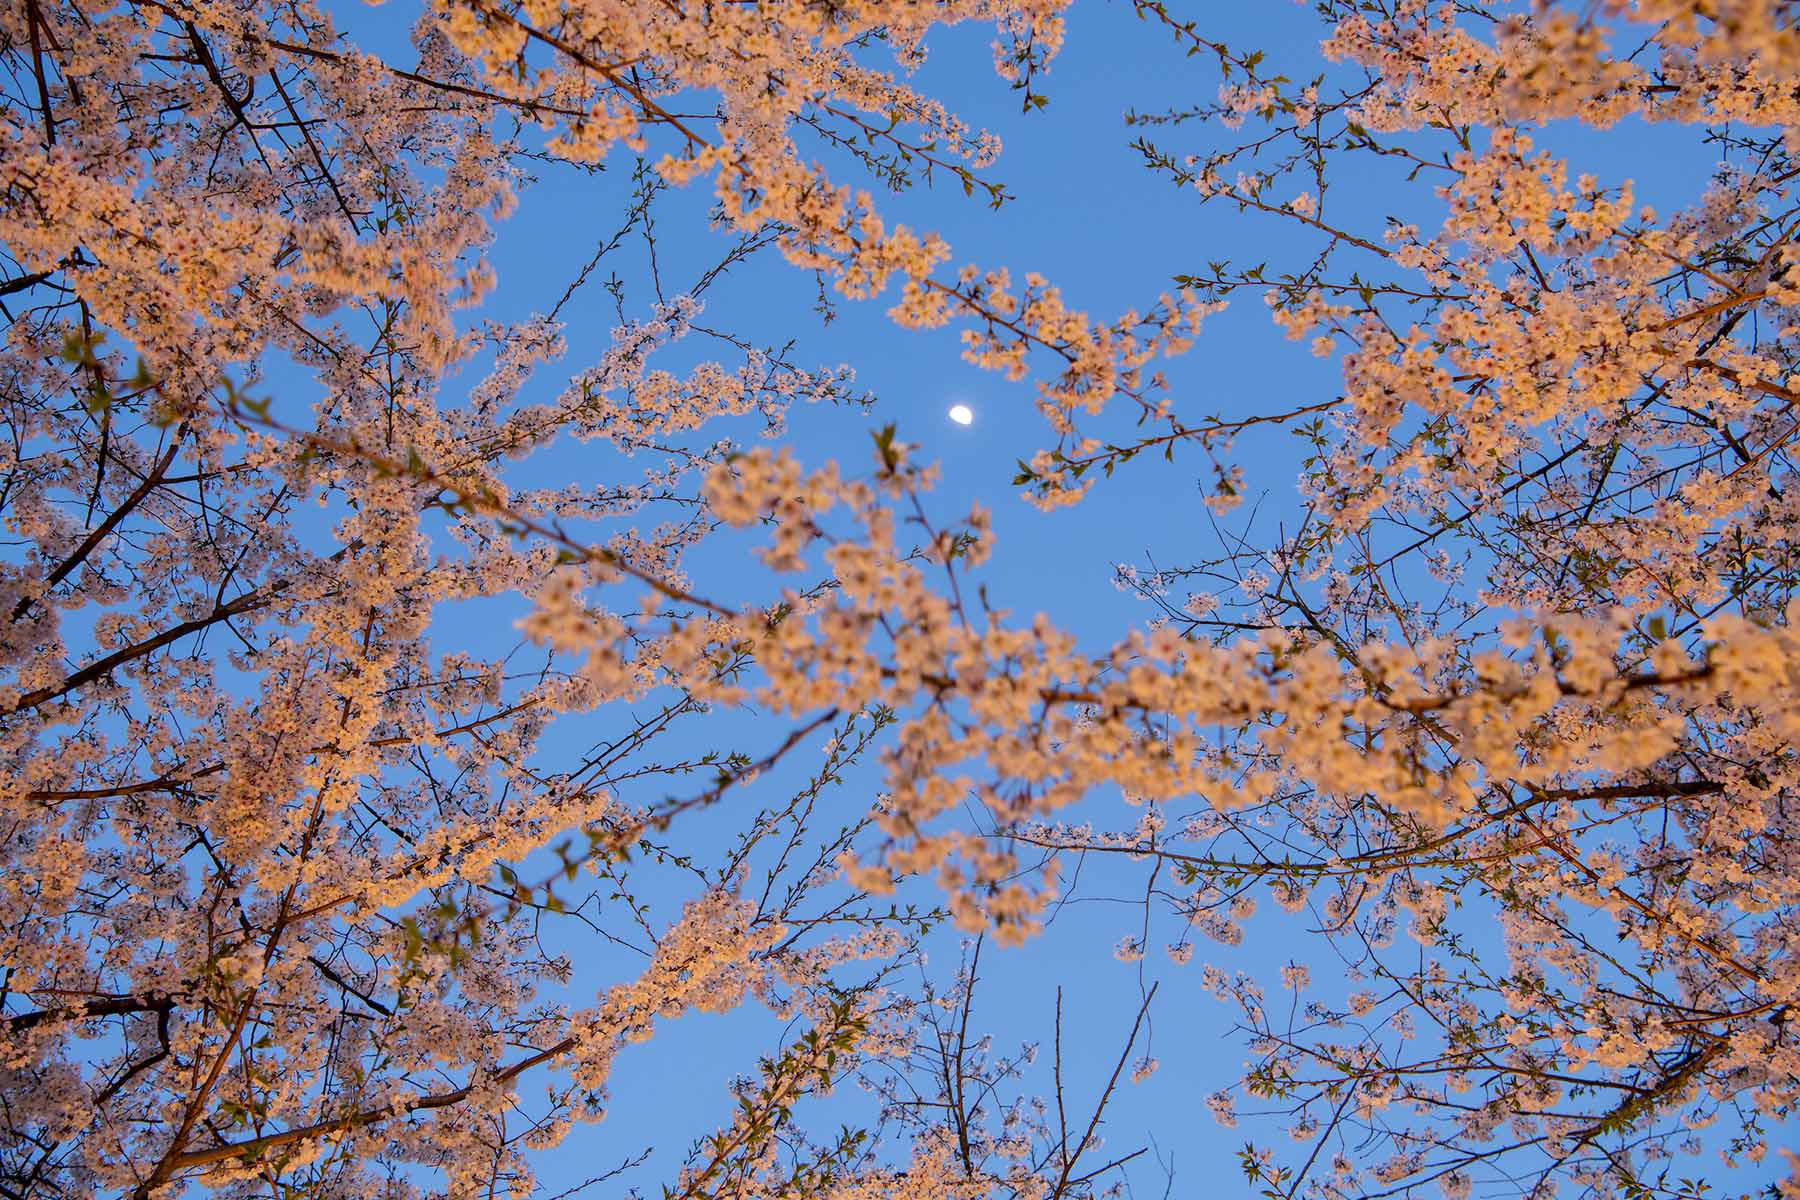 A view of the moon through cherry blossom flowers